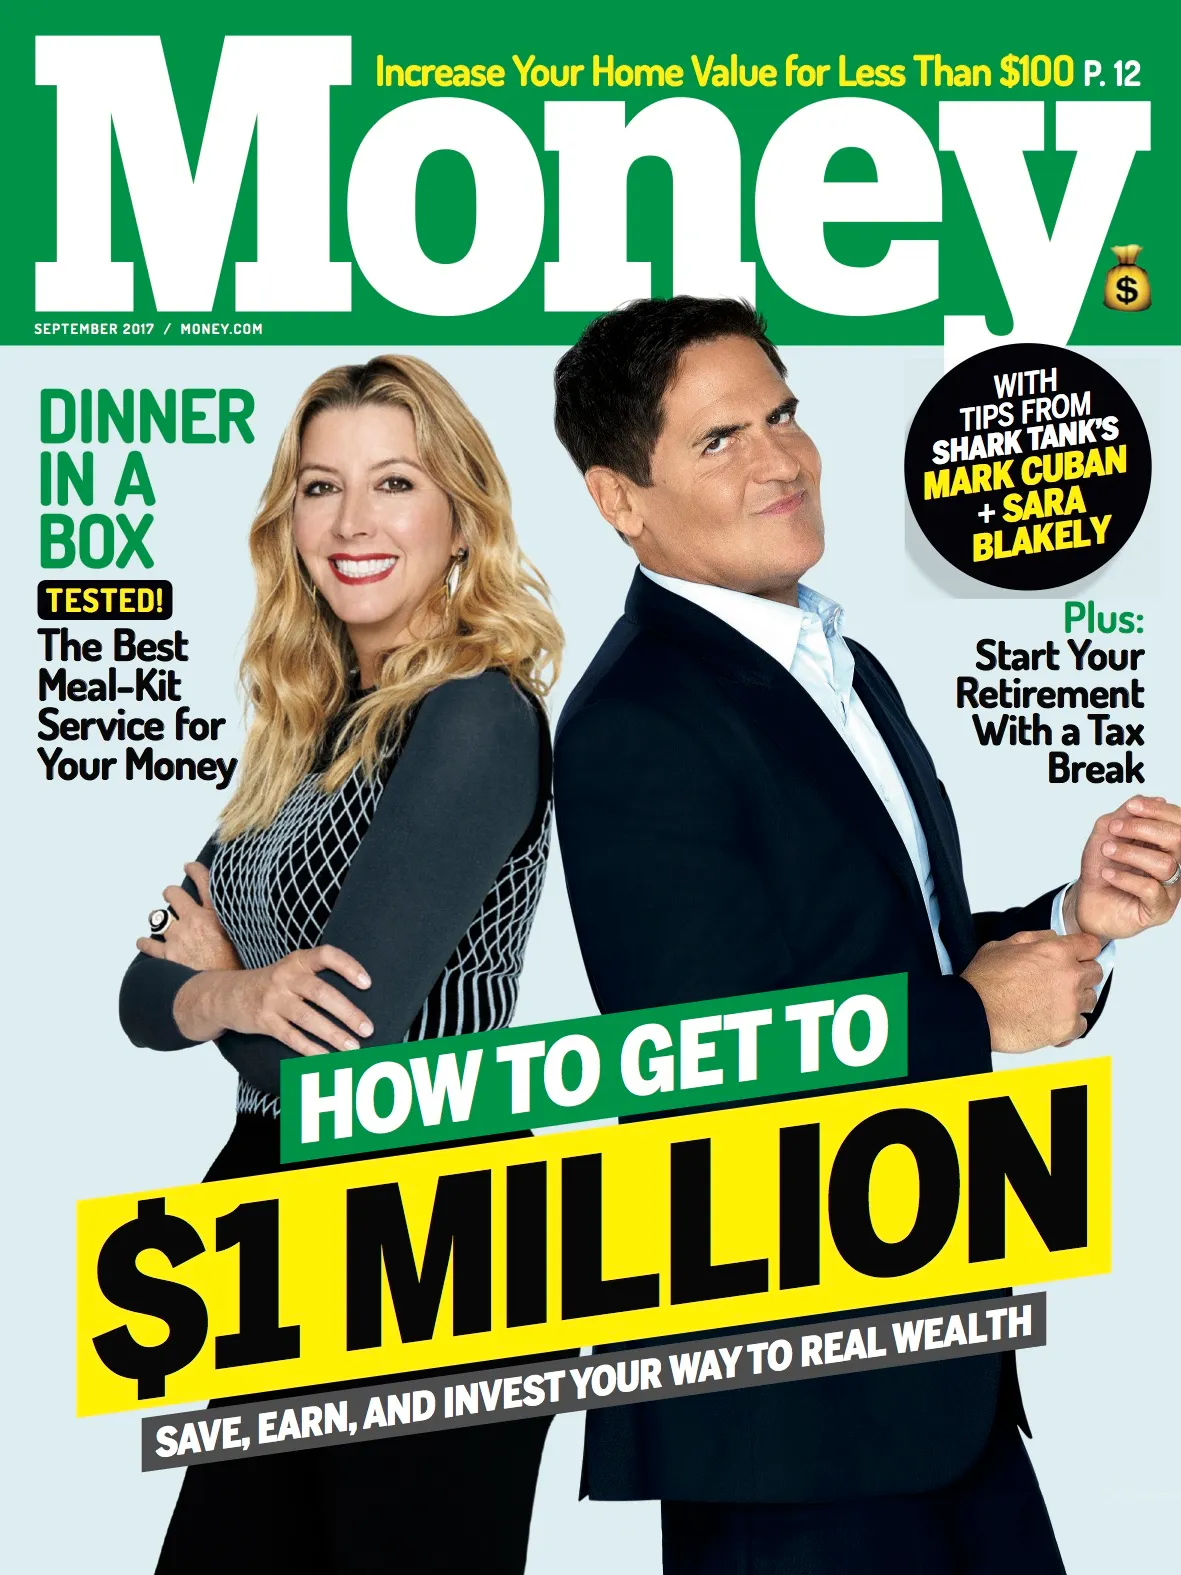 Shark Tank's Mark Cuban and Sara Blakely: How to Get to $1 Million